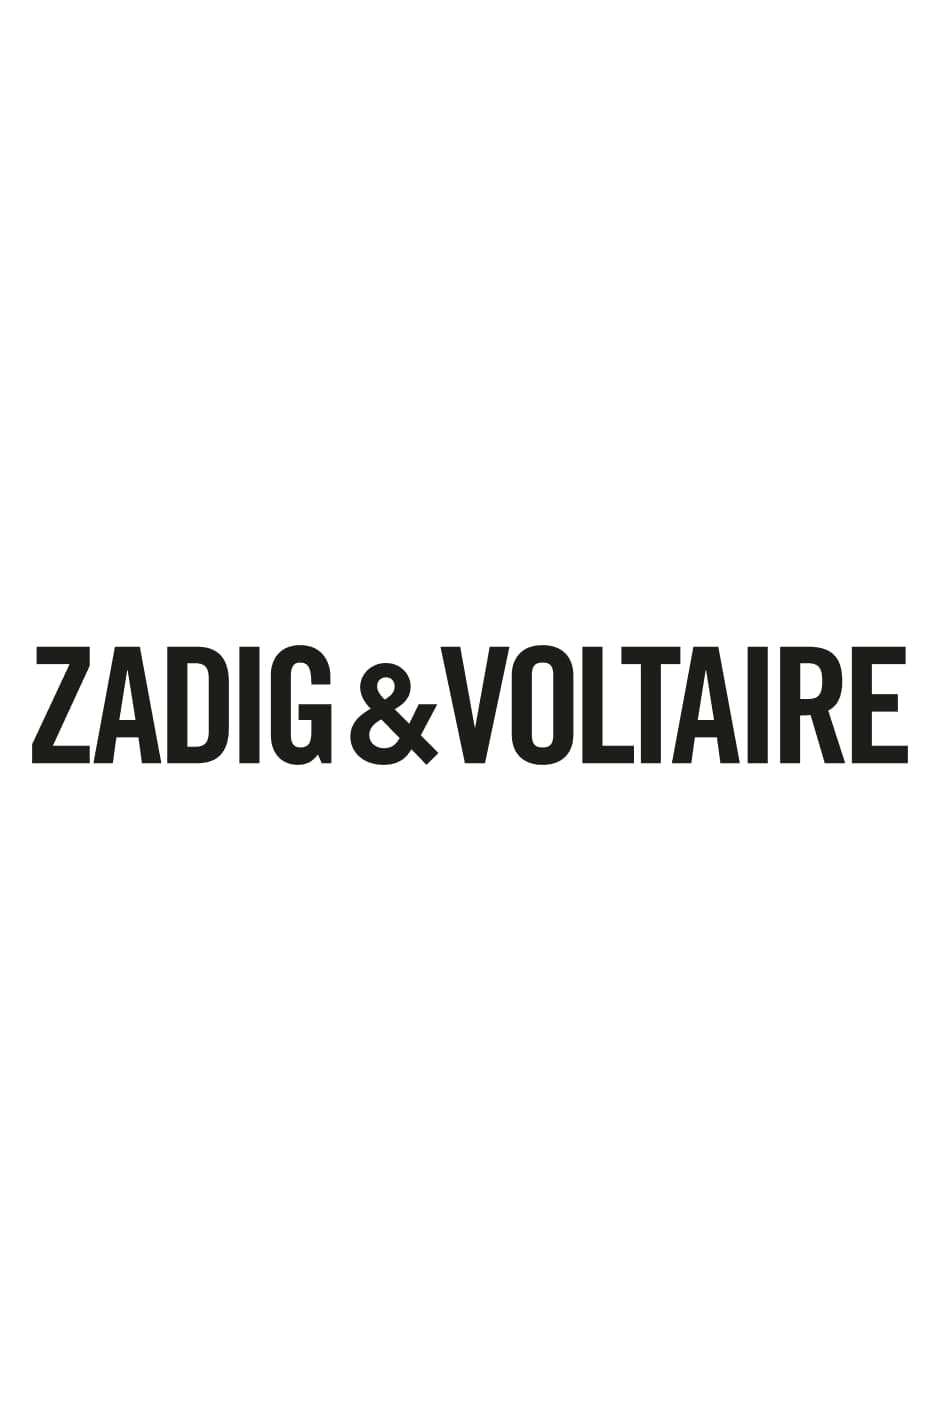 ZV Initiale ミニバッグ Zadig&Voltaire Women’s ZV Initiale Le Mini bag in black smooth leather